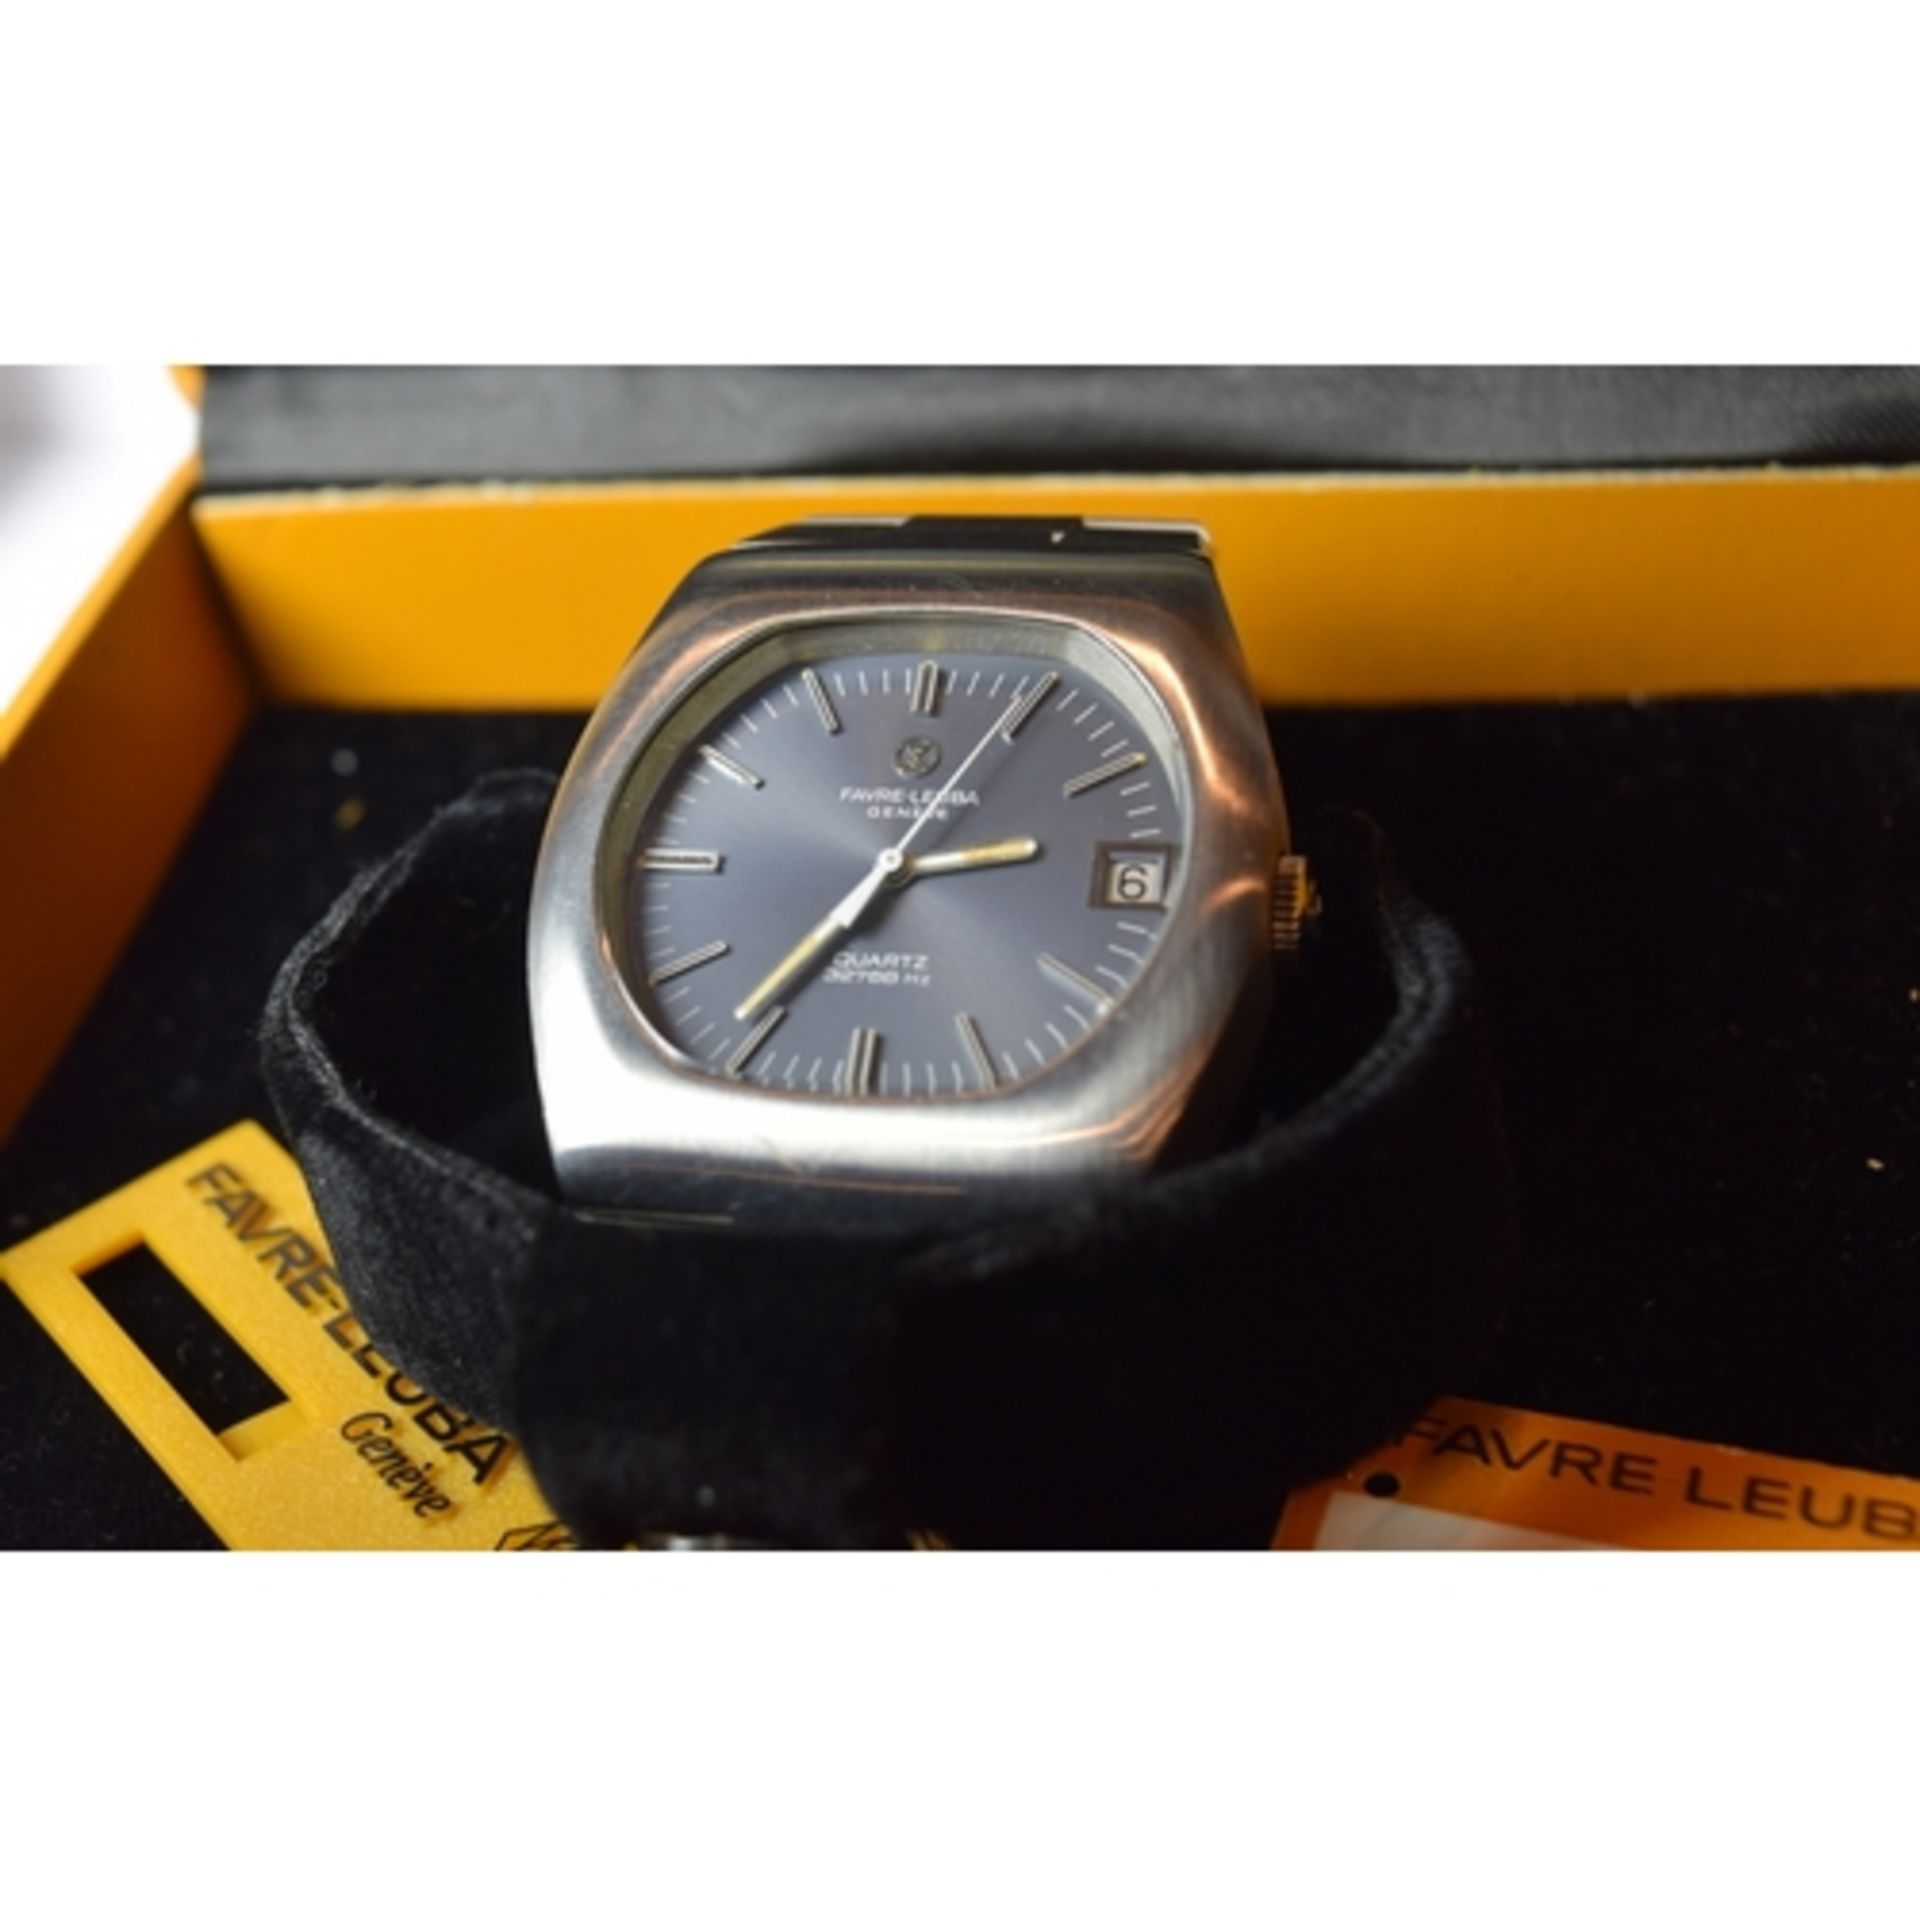 Rare Favre Leuba Quartz NOS in box and with tags and papers. - Image 3 of 6